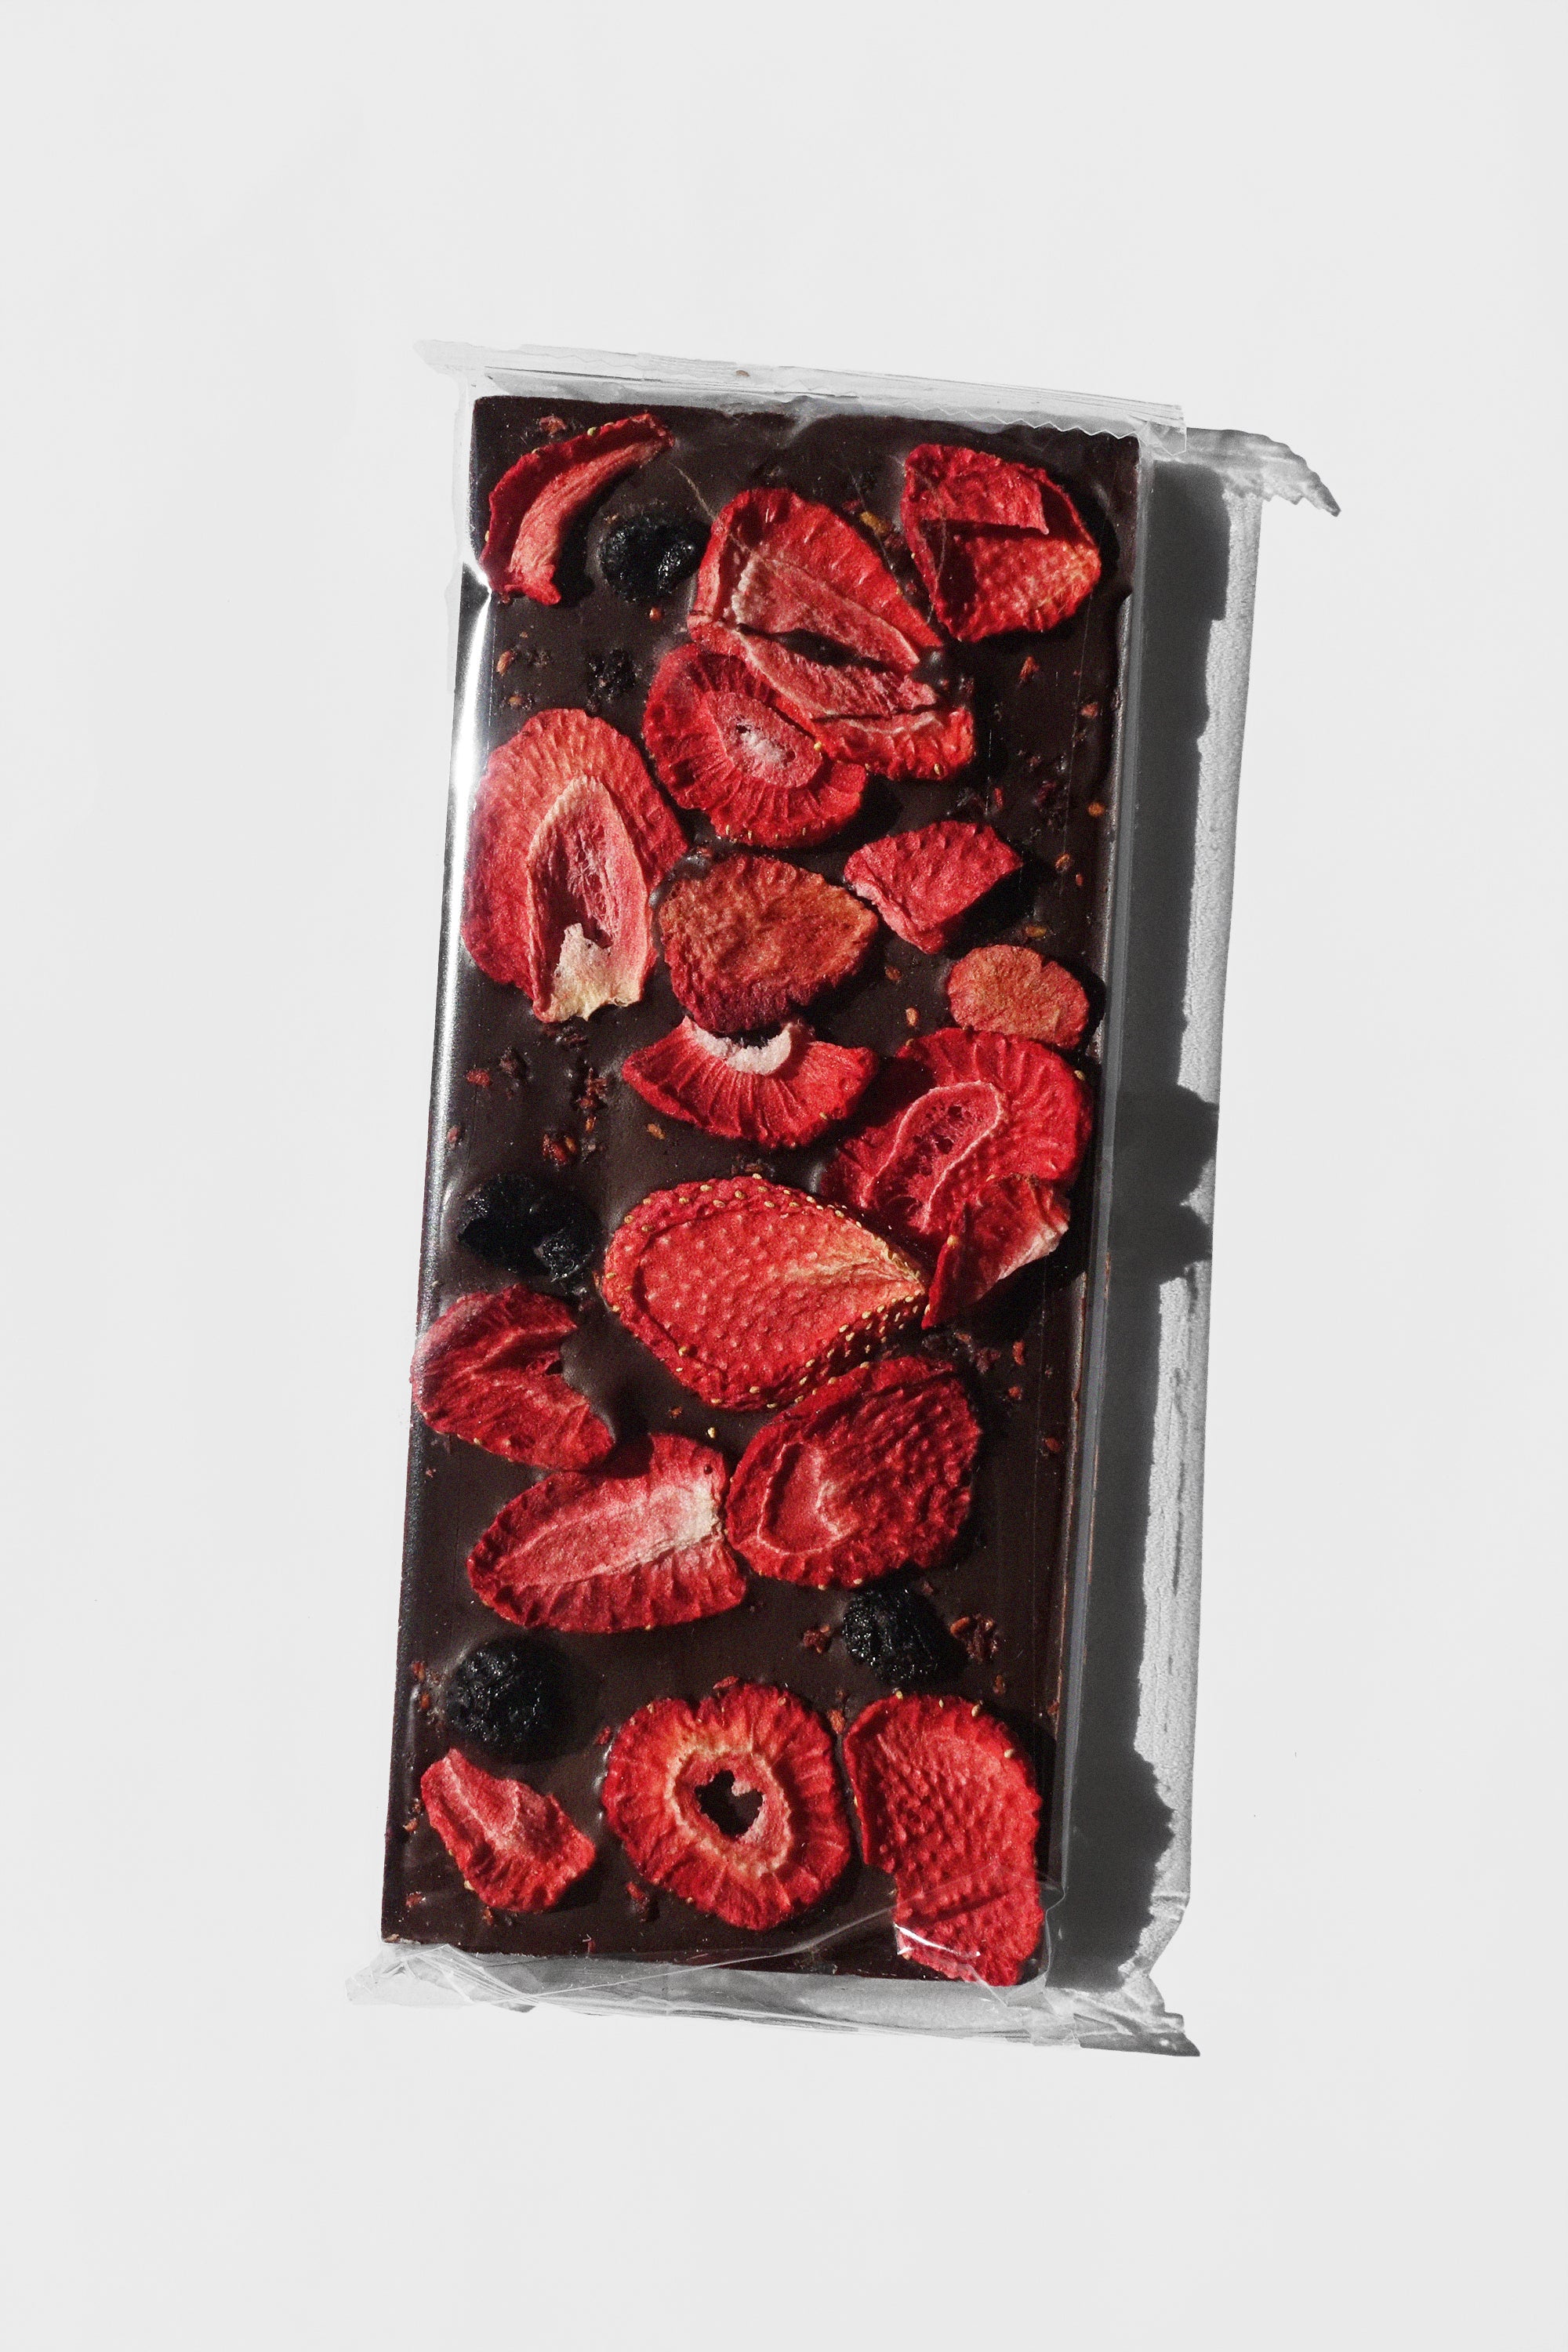 Mango Chile:  Date-Sweetened Chocolate Bar by Spring & Mulberry